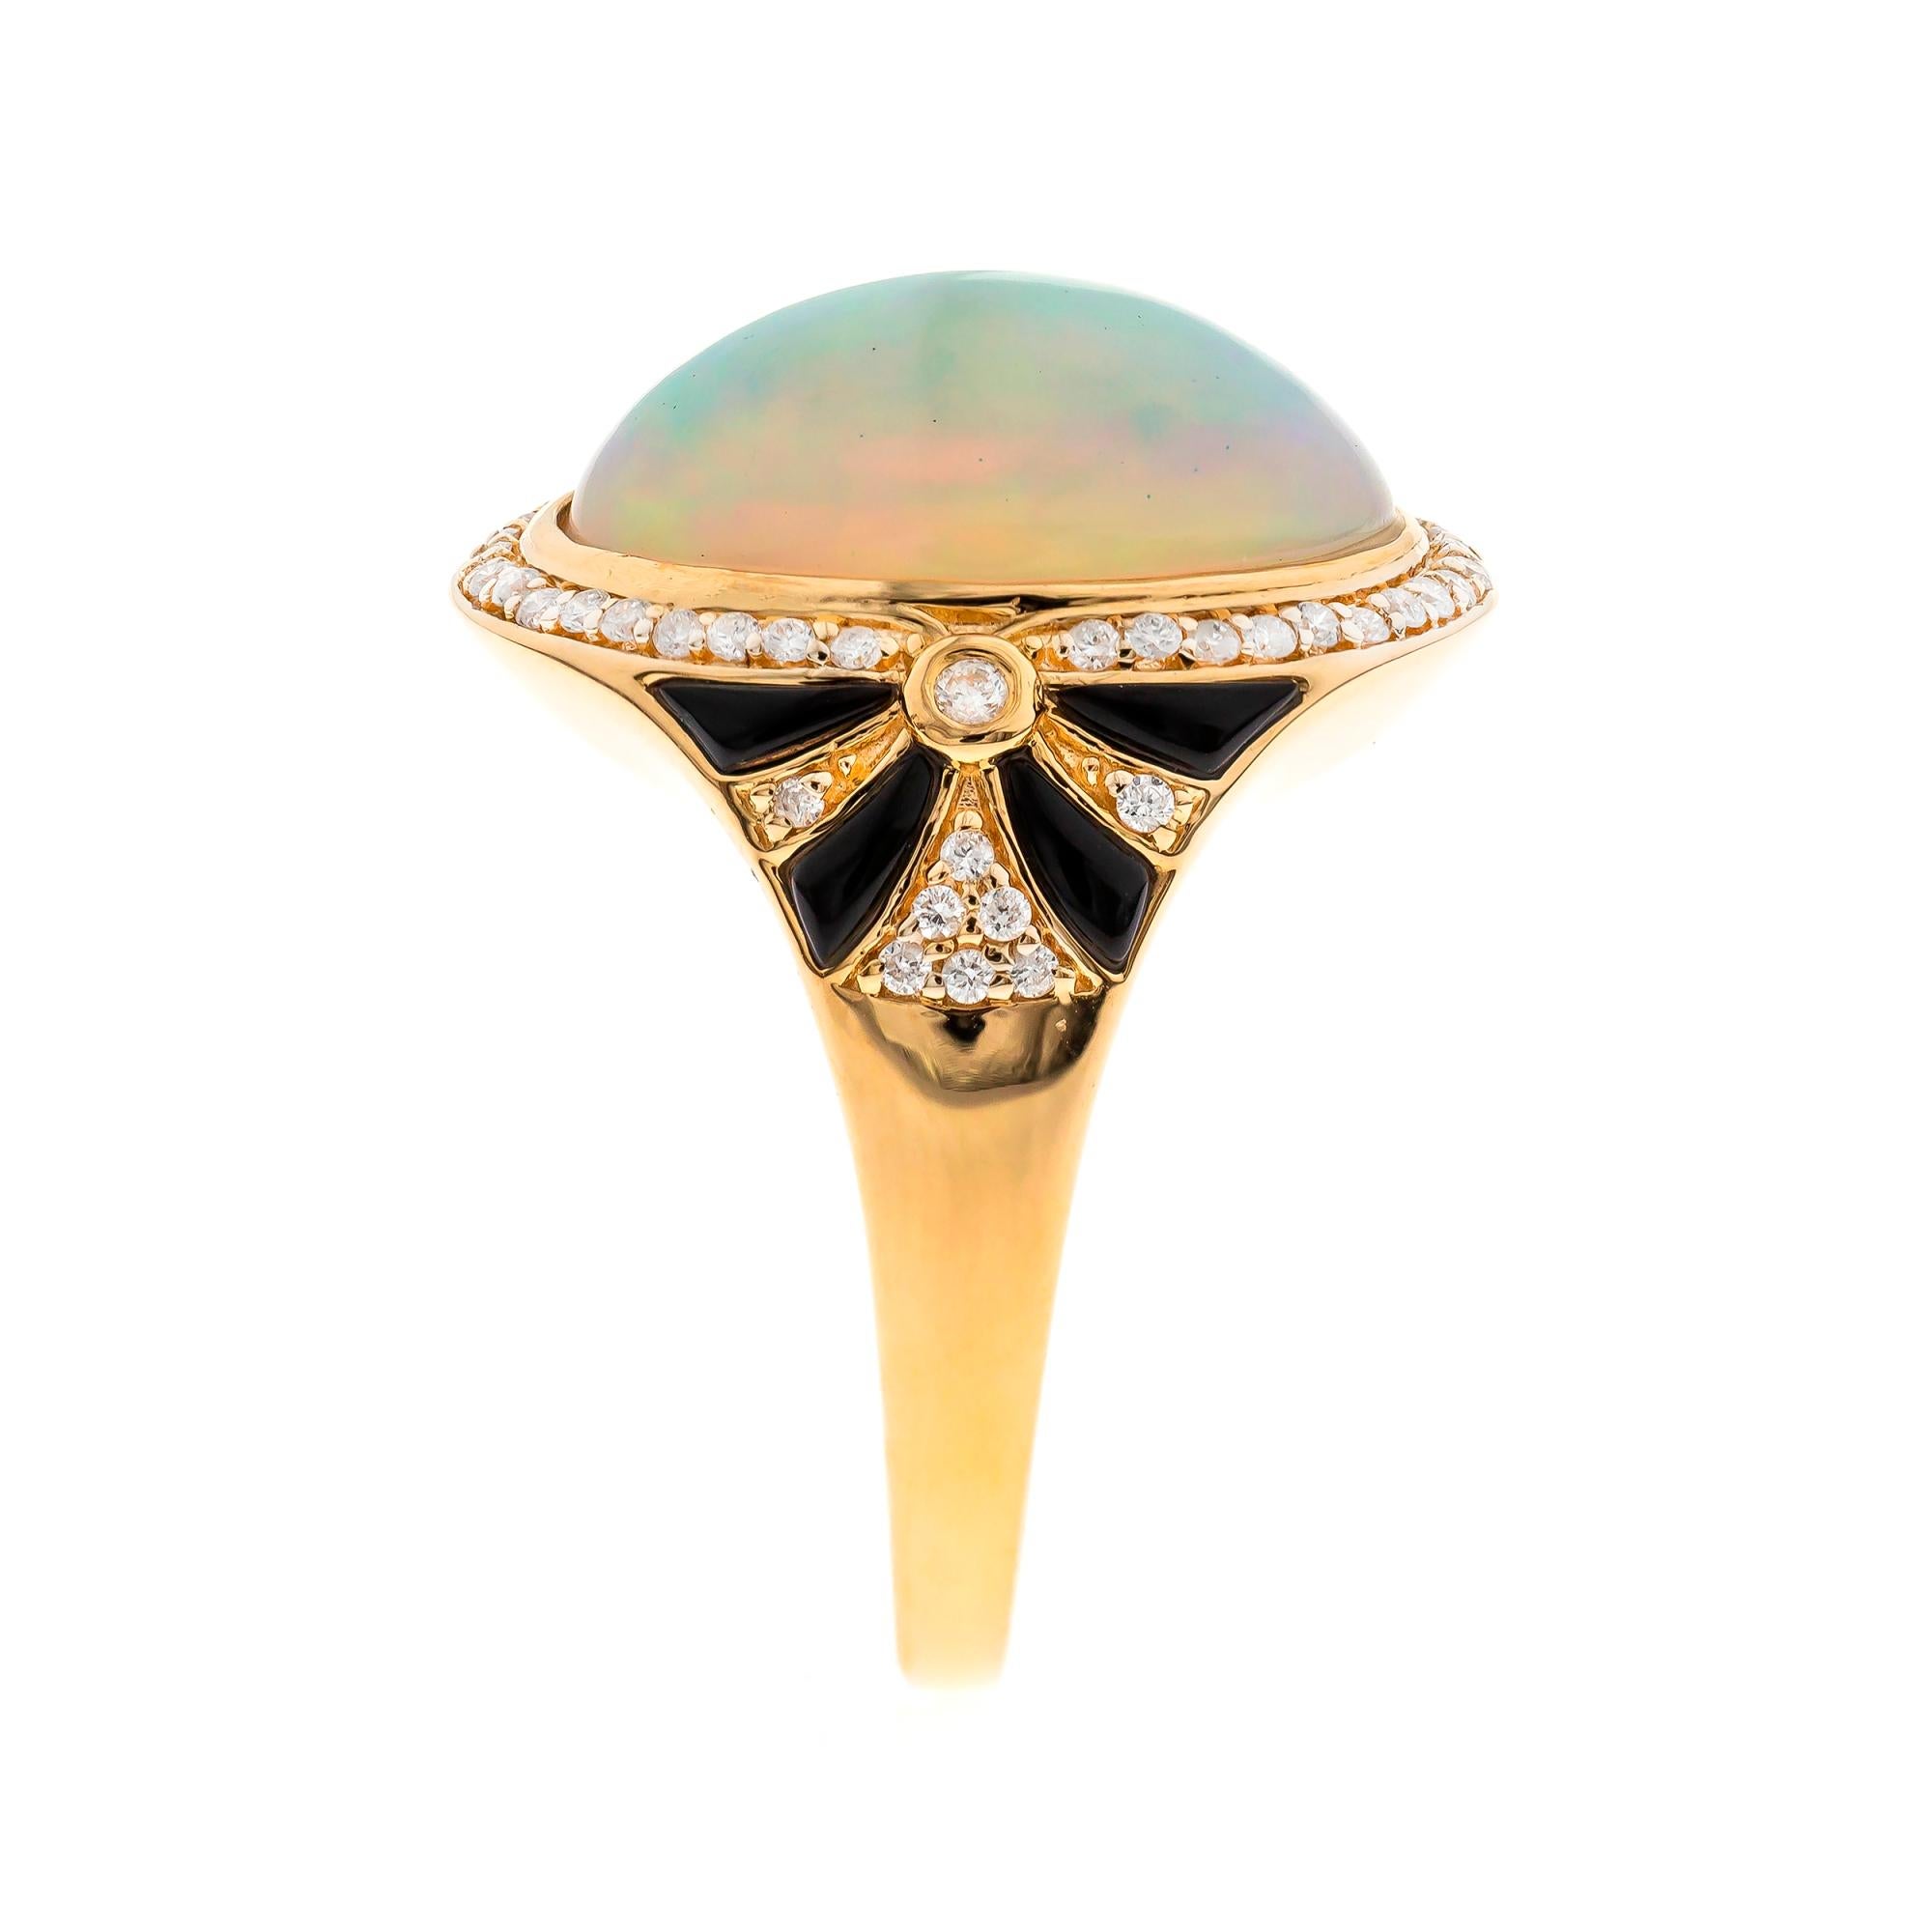 Stunning, timeless and classy eternity Unique Ring. Decorate yourself in luxury with this Gin & Grace Ring. The 14K Yellow Gold jewelry boasts with Oval-Cab Ethiopian Opal 1 pcs 5.40 carat, Onyx (8pcs) 0.39 carat, Natural Round-cut white Diamond (58